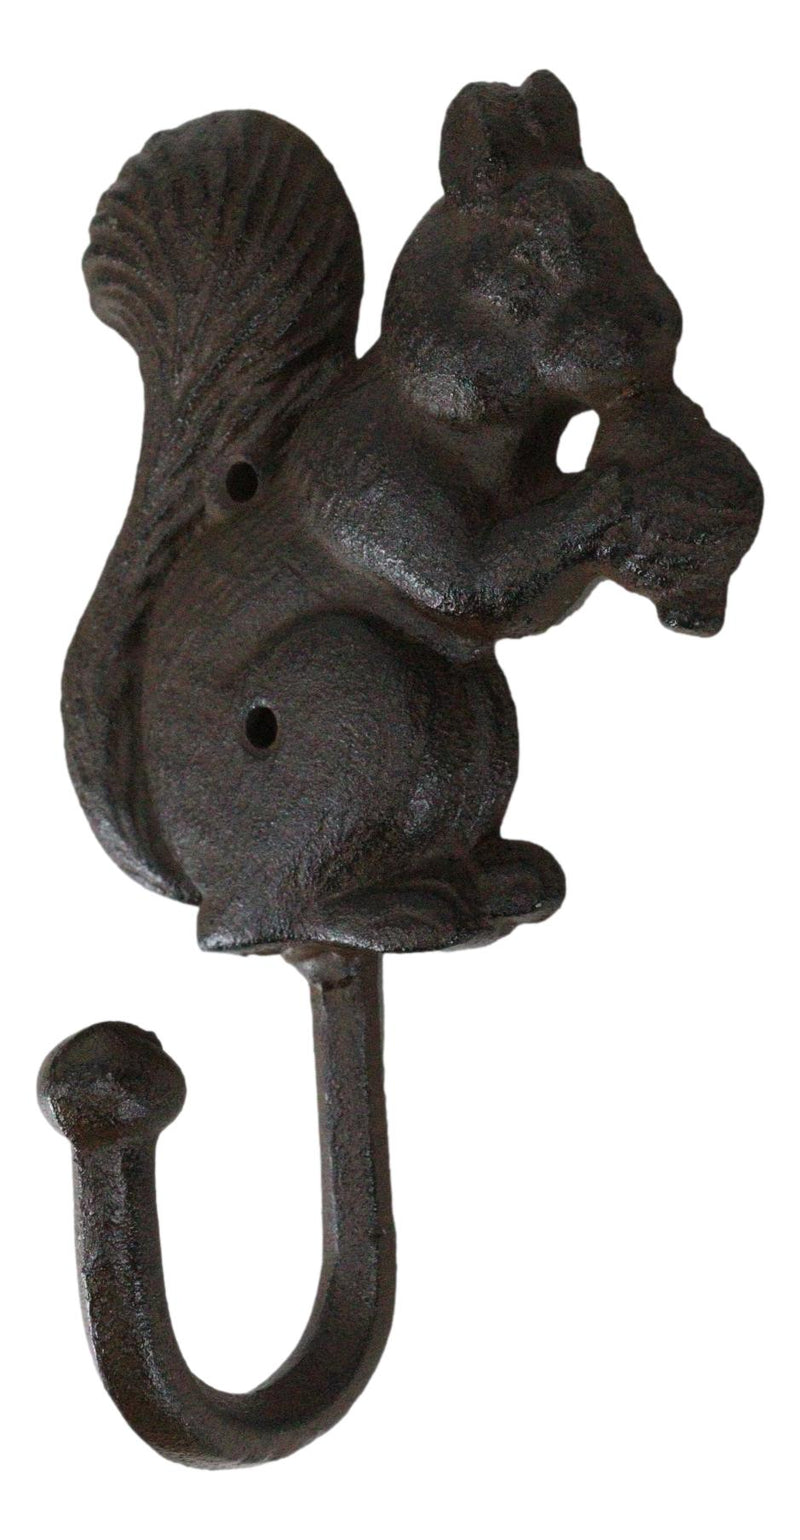 Rustic Western Cast Iron Tree Squirrel With Acorns Wall Coat Hooks Sculpture